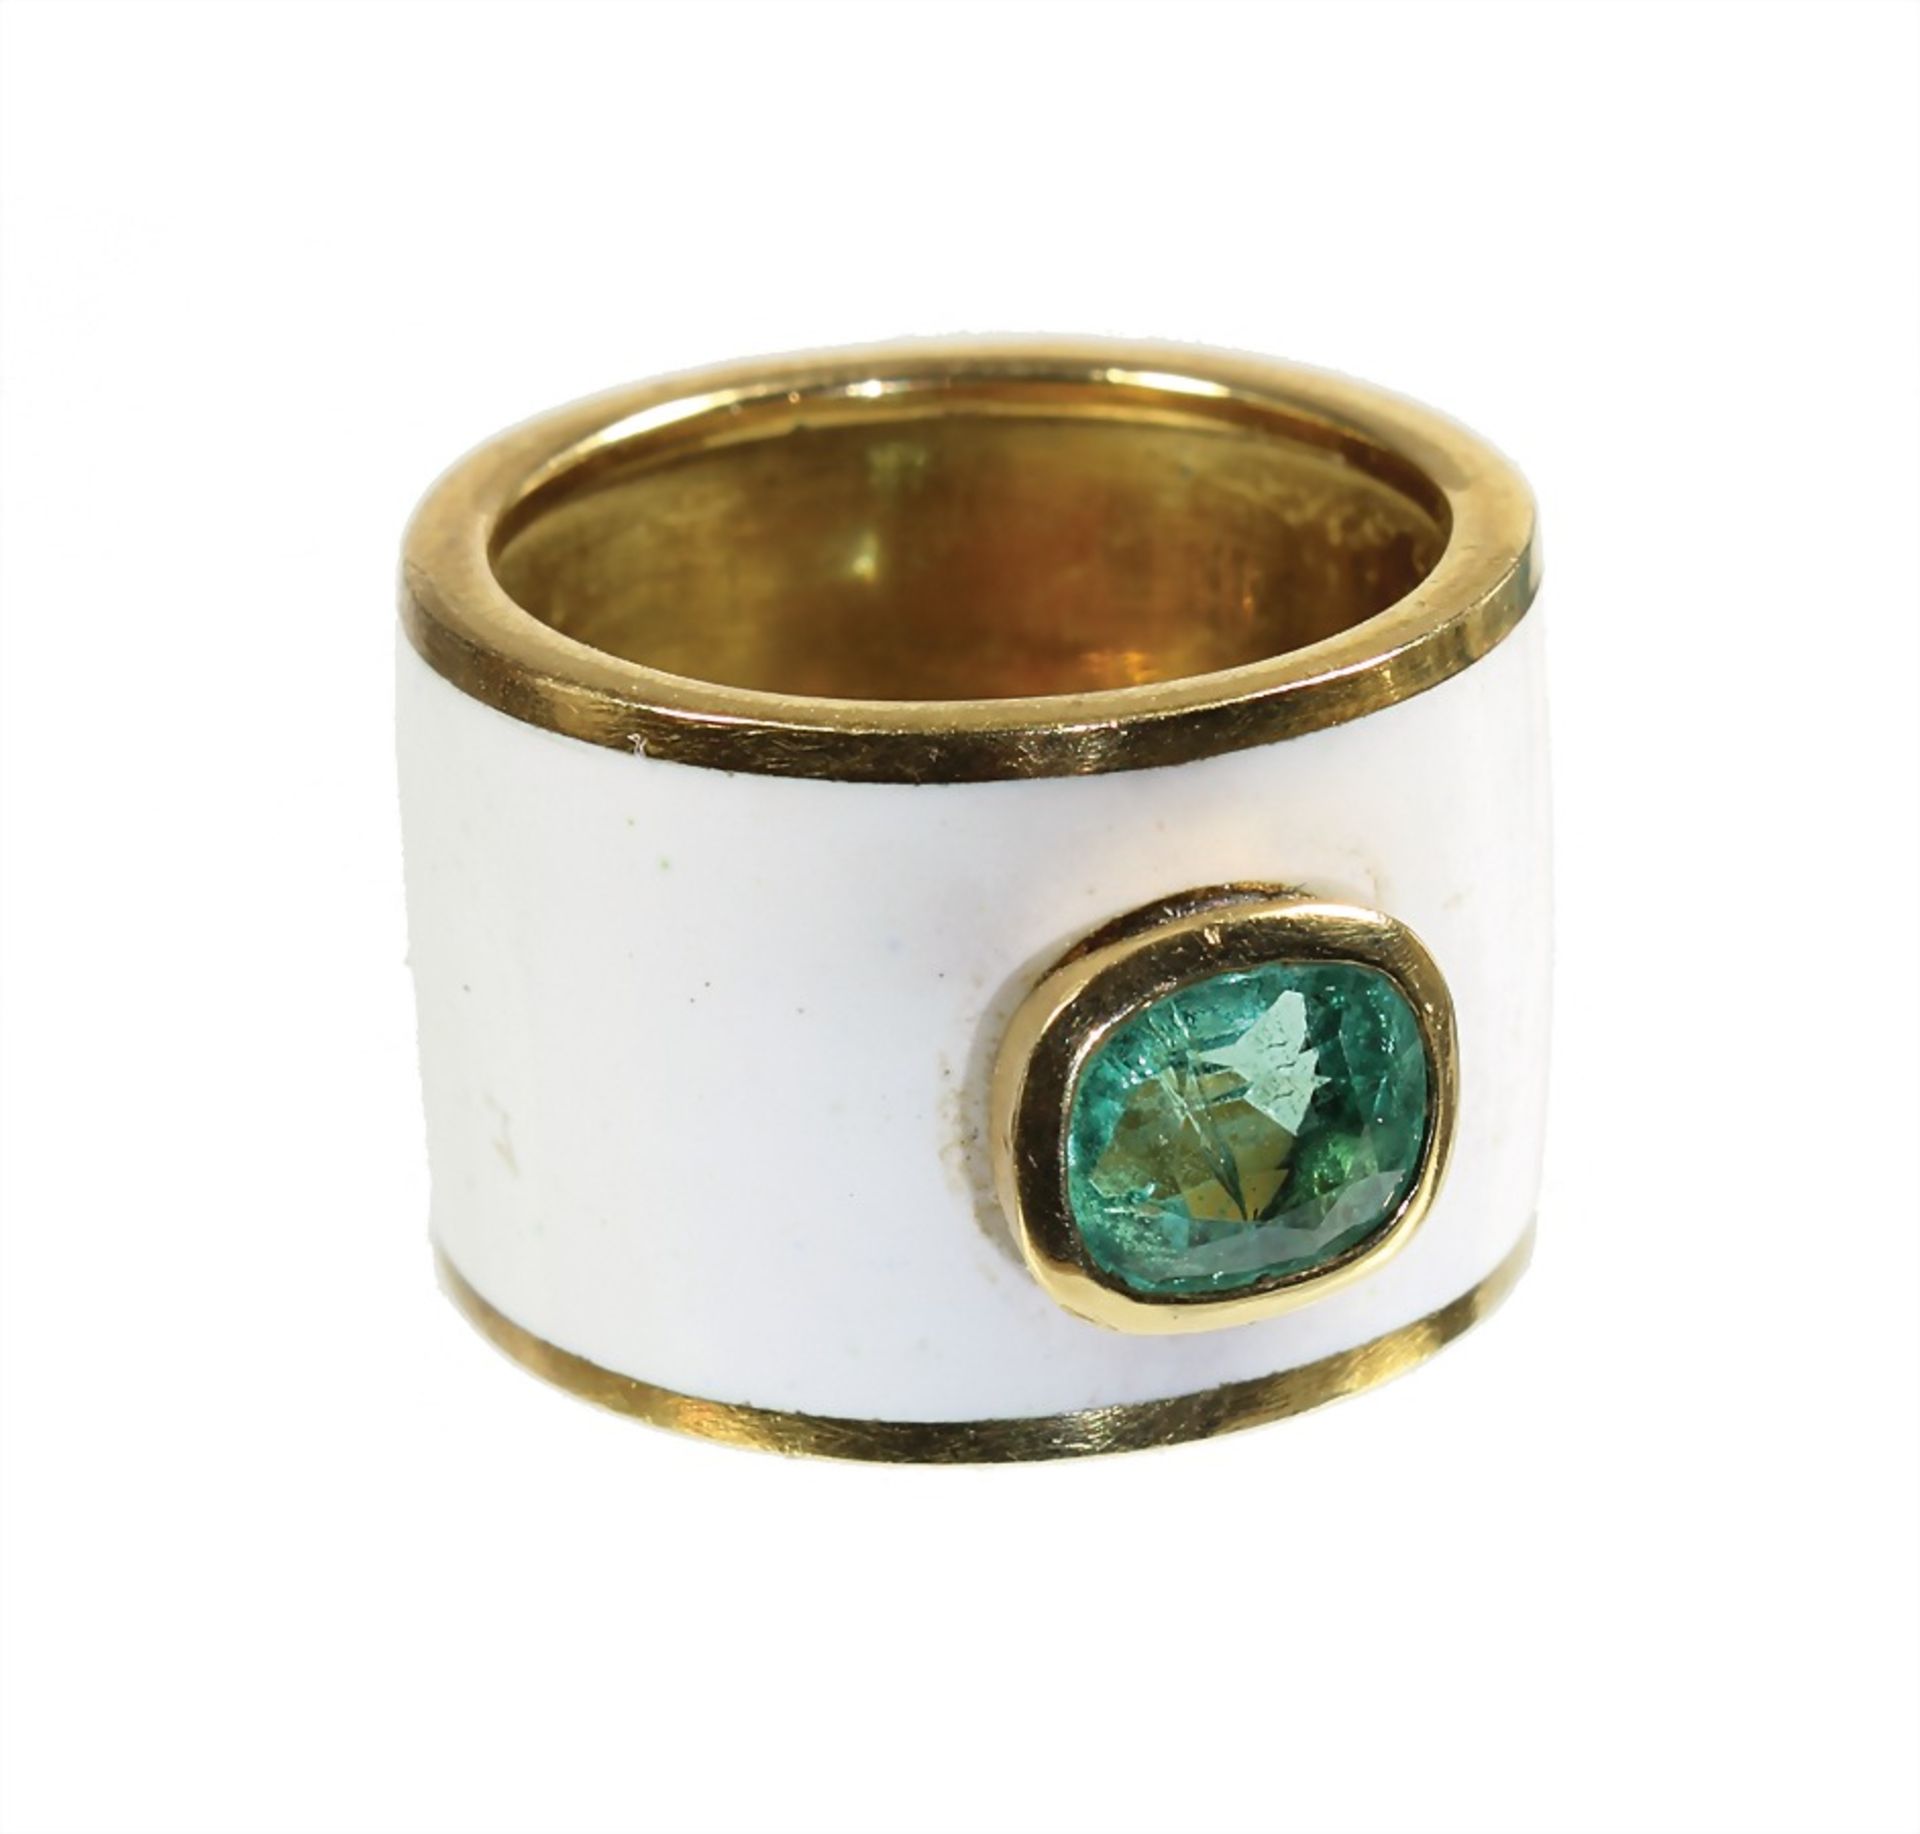 ring, yelow gold 585/000, 1 emerald c. 7 x 5.7 mm (faceted), white enameled all round , width = 13.5